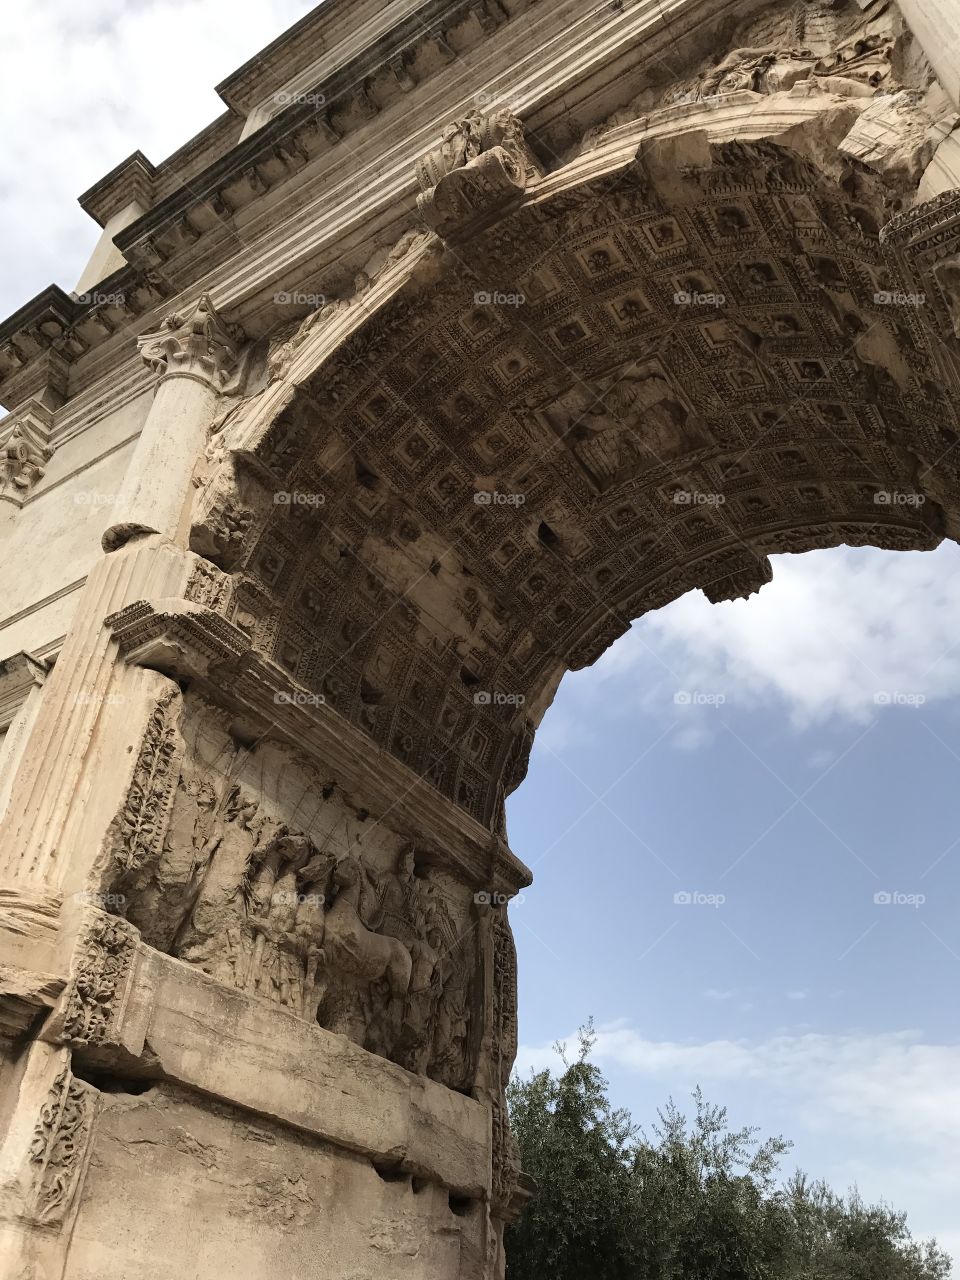 Arch of Constantine 